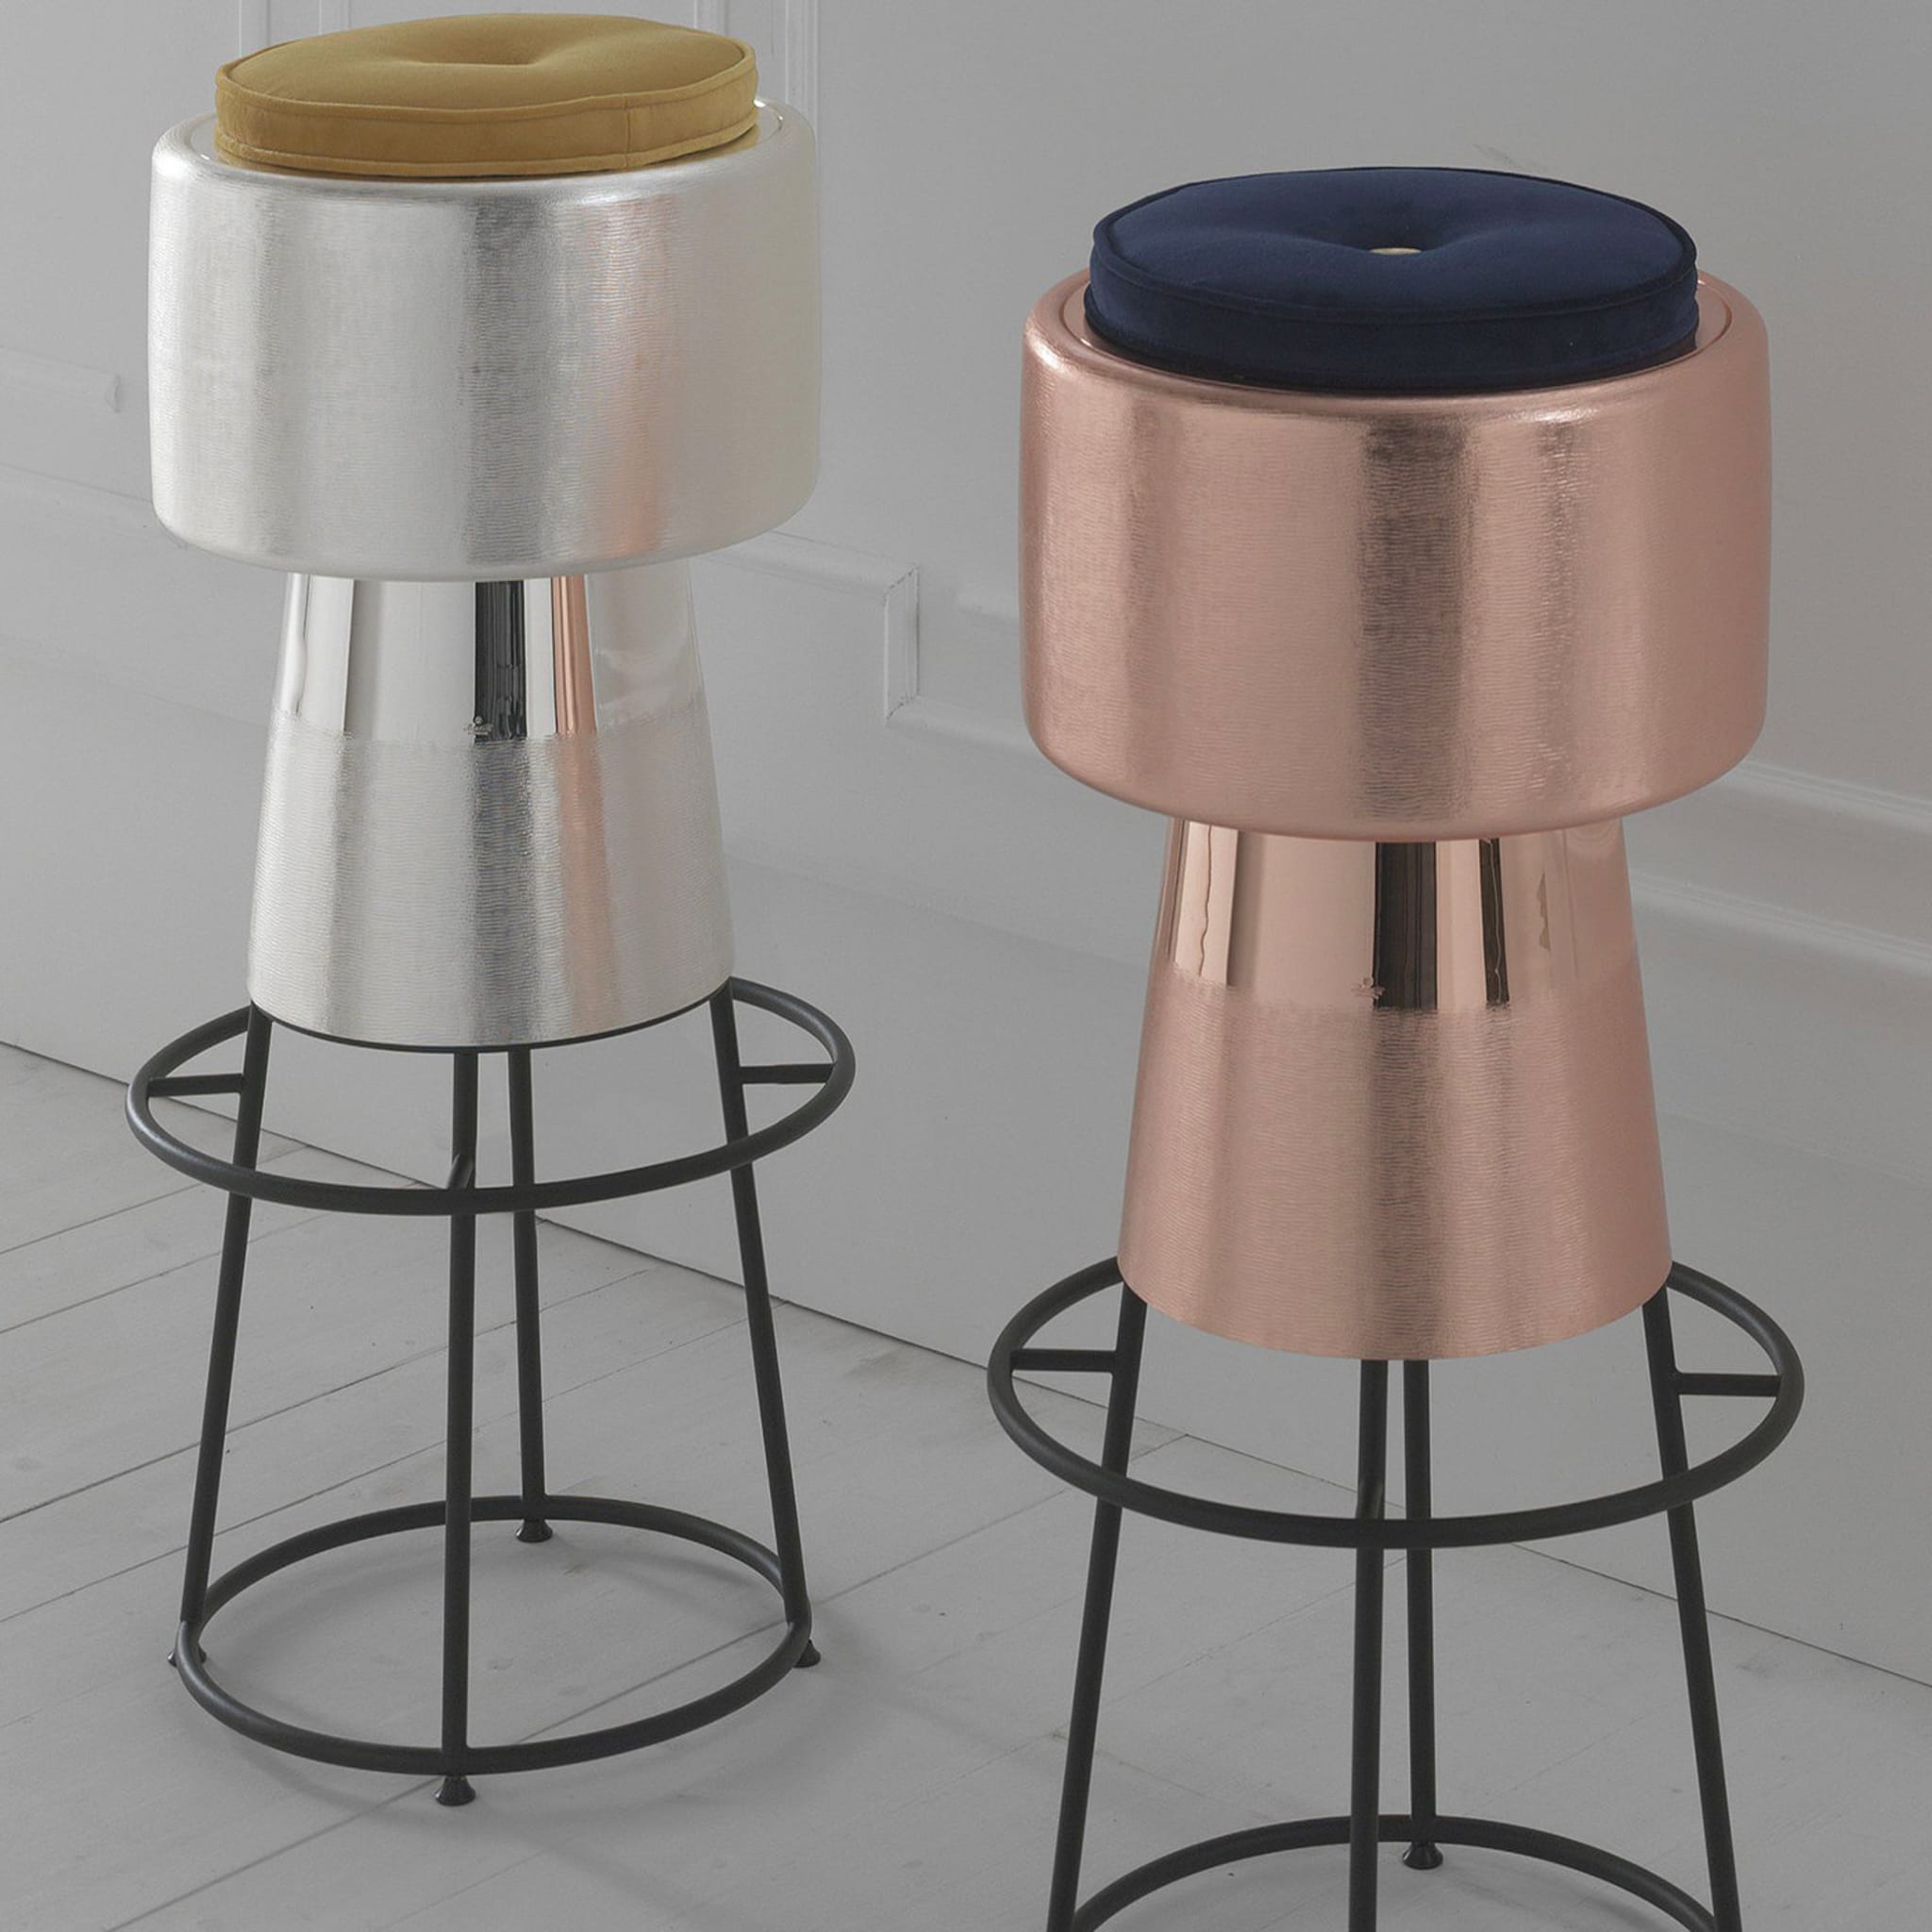 Tappo Copper Bar Stool by NOOII - Alternative view 1